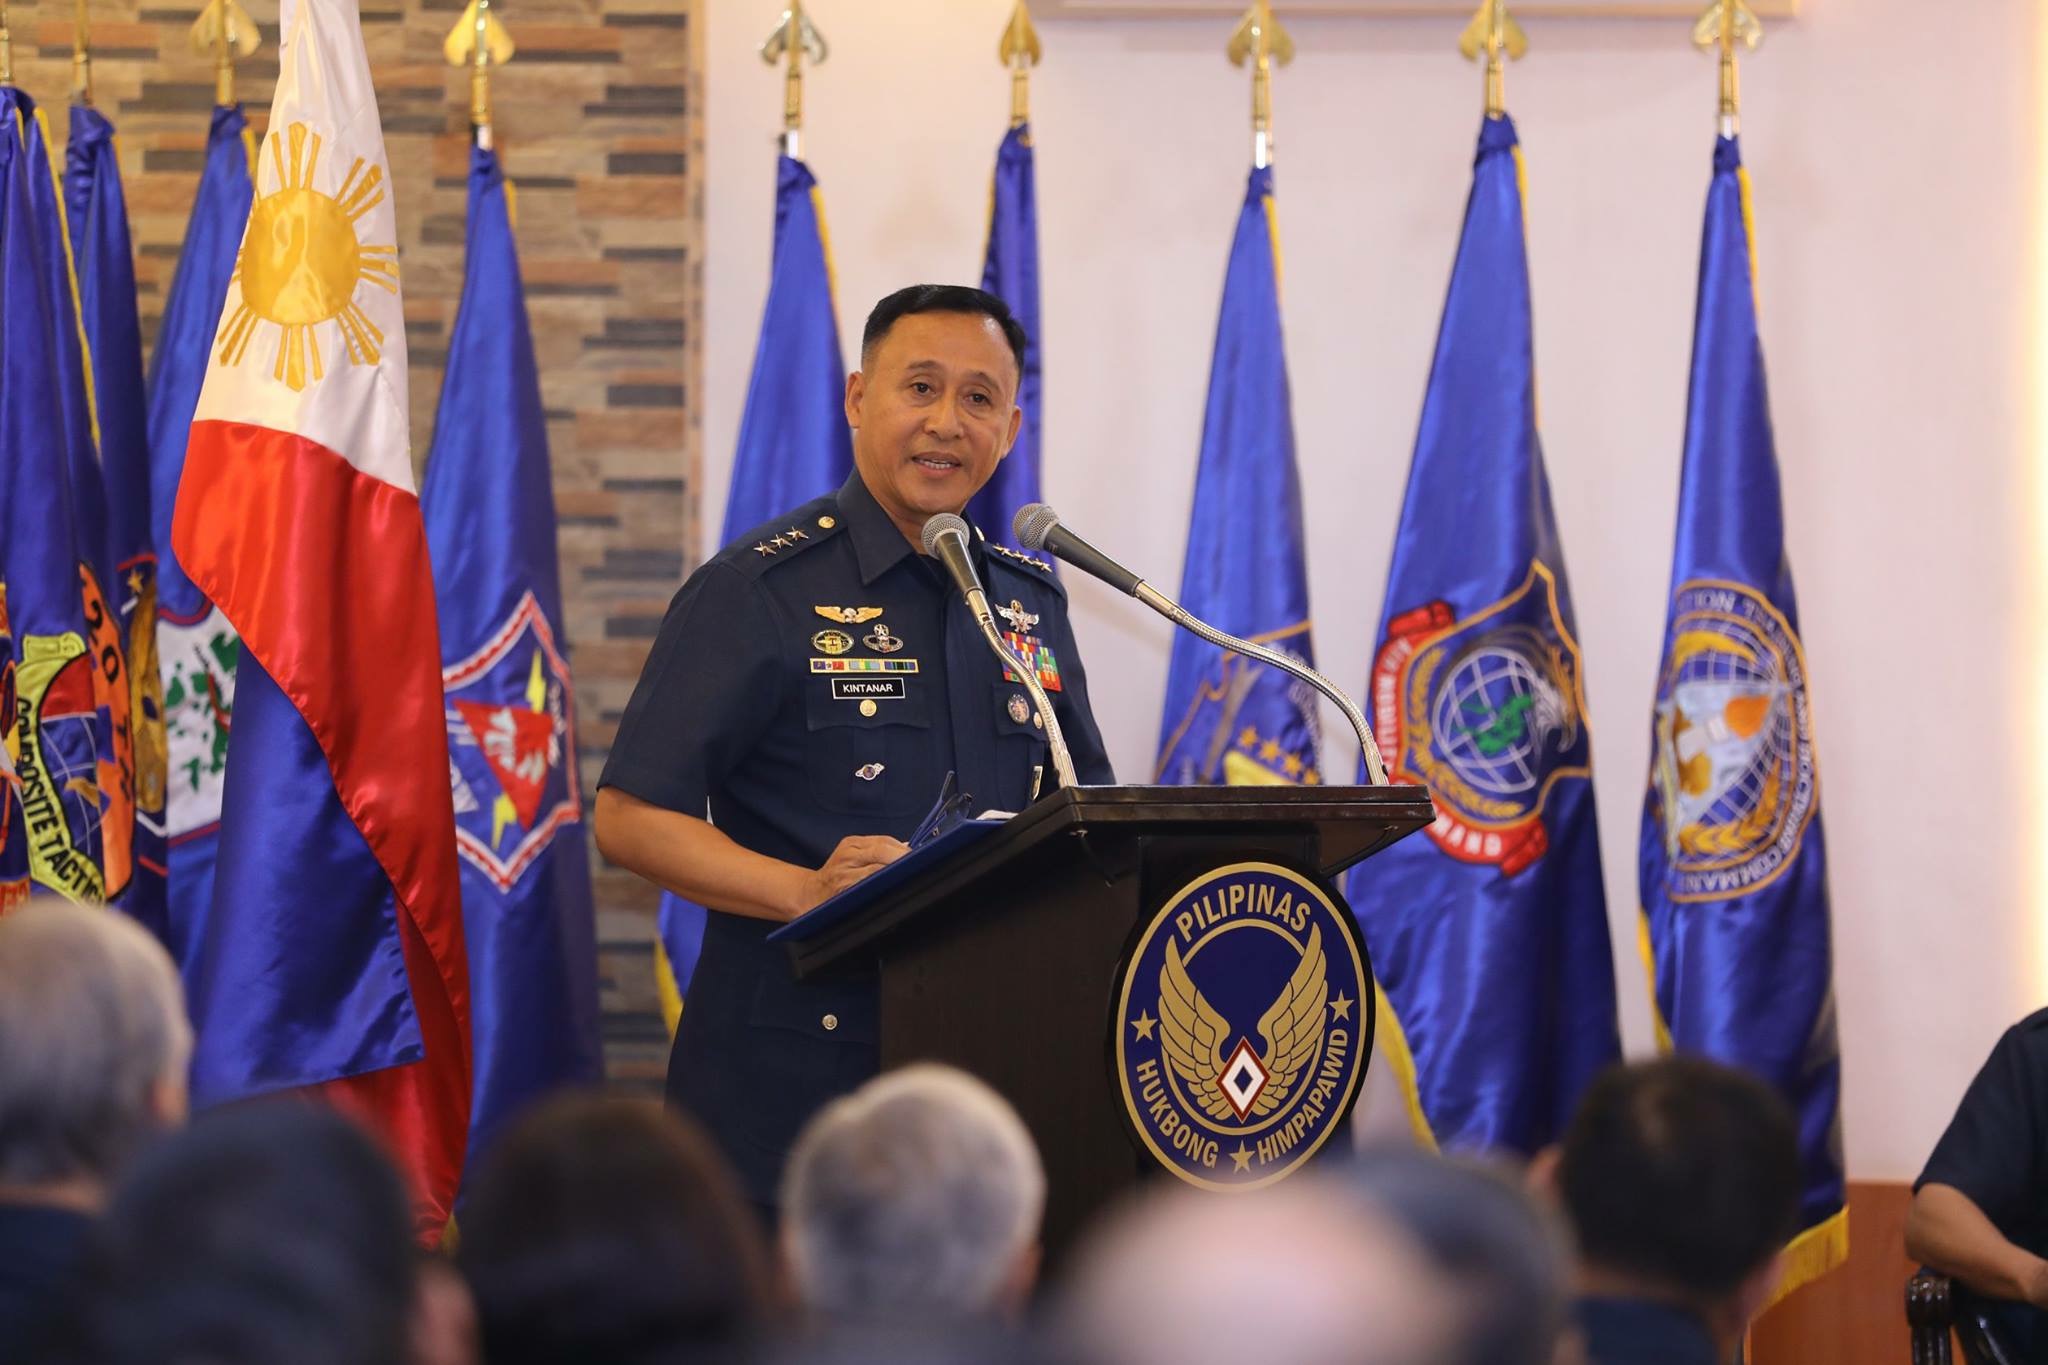 Air Force chief ‘retired, not relieved’